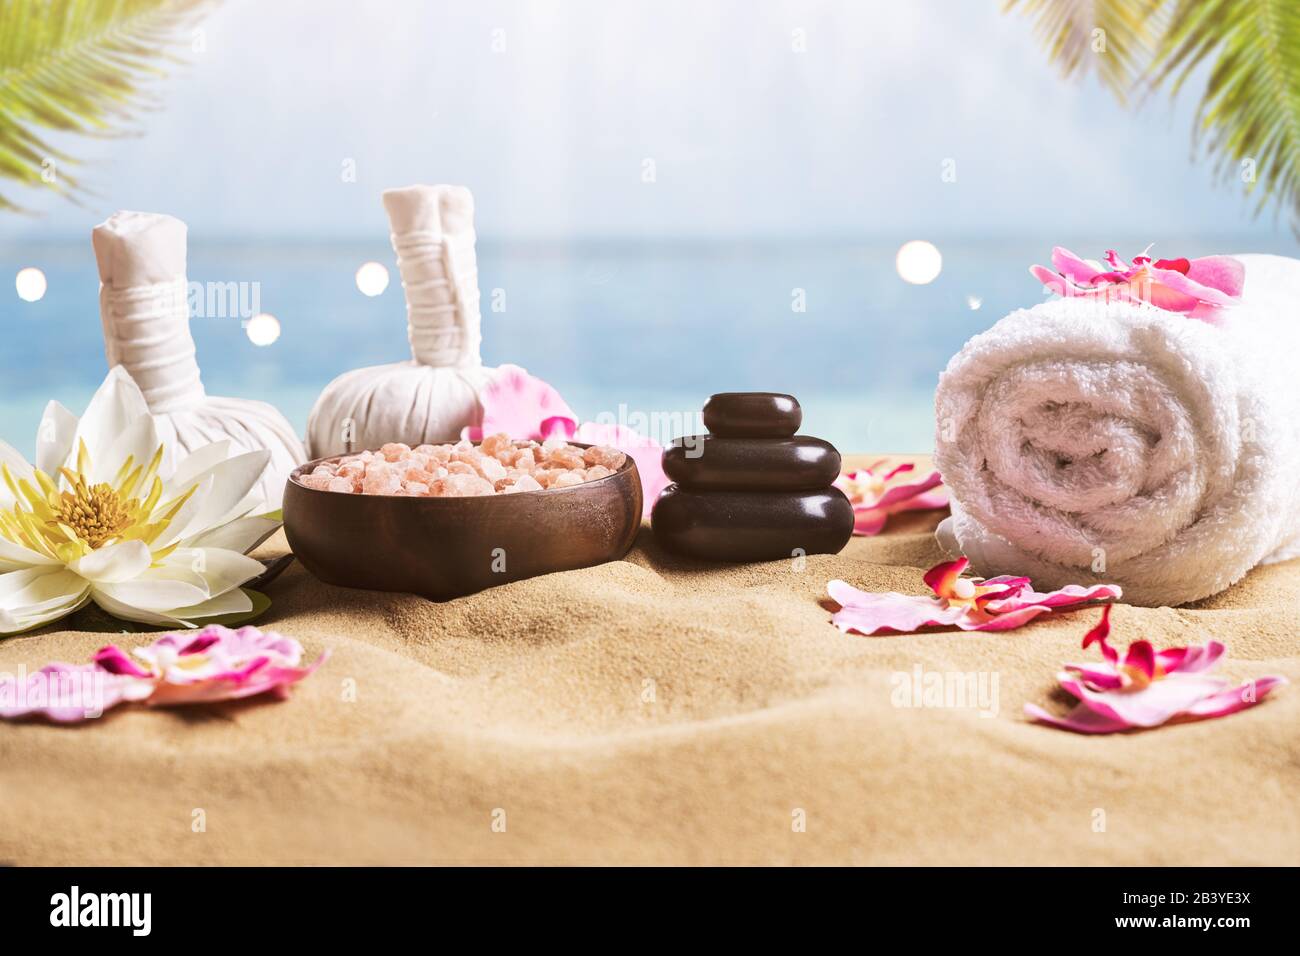 Massage And Spa Accessories On Sandy Beach Stock Photo